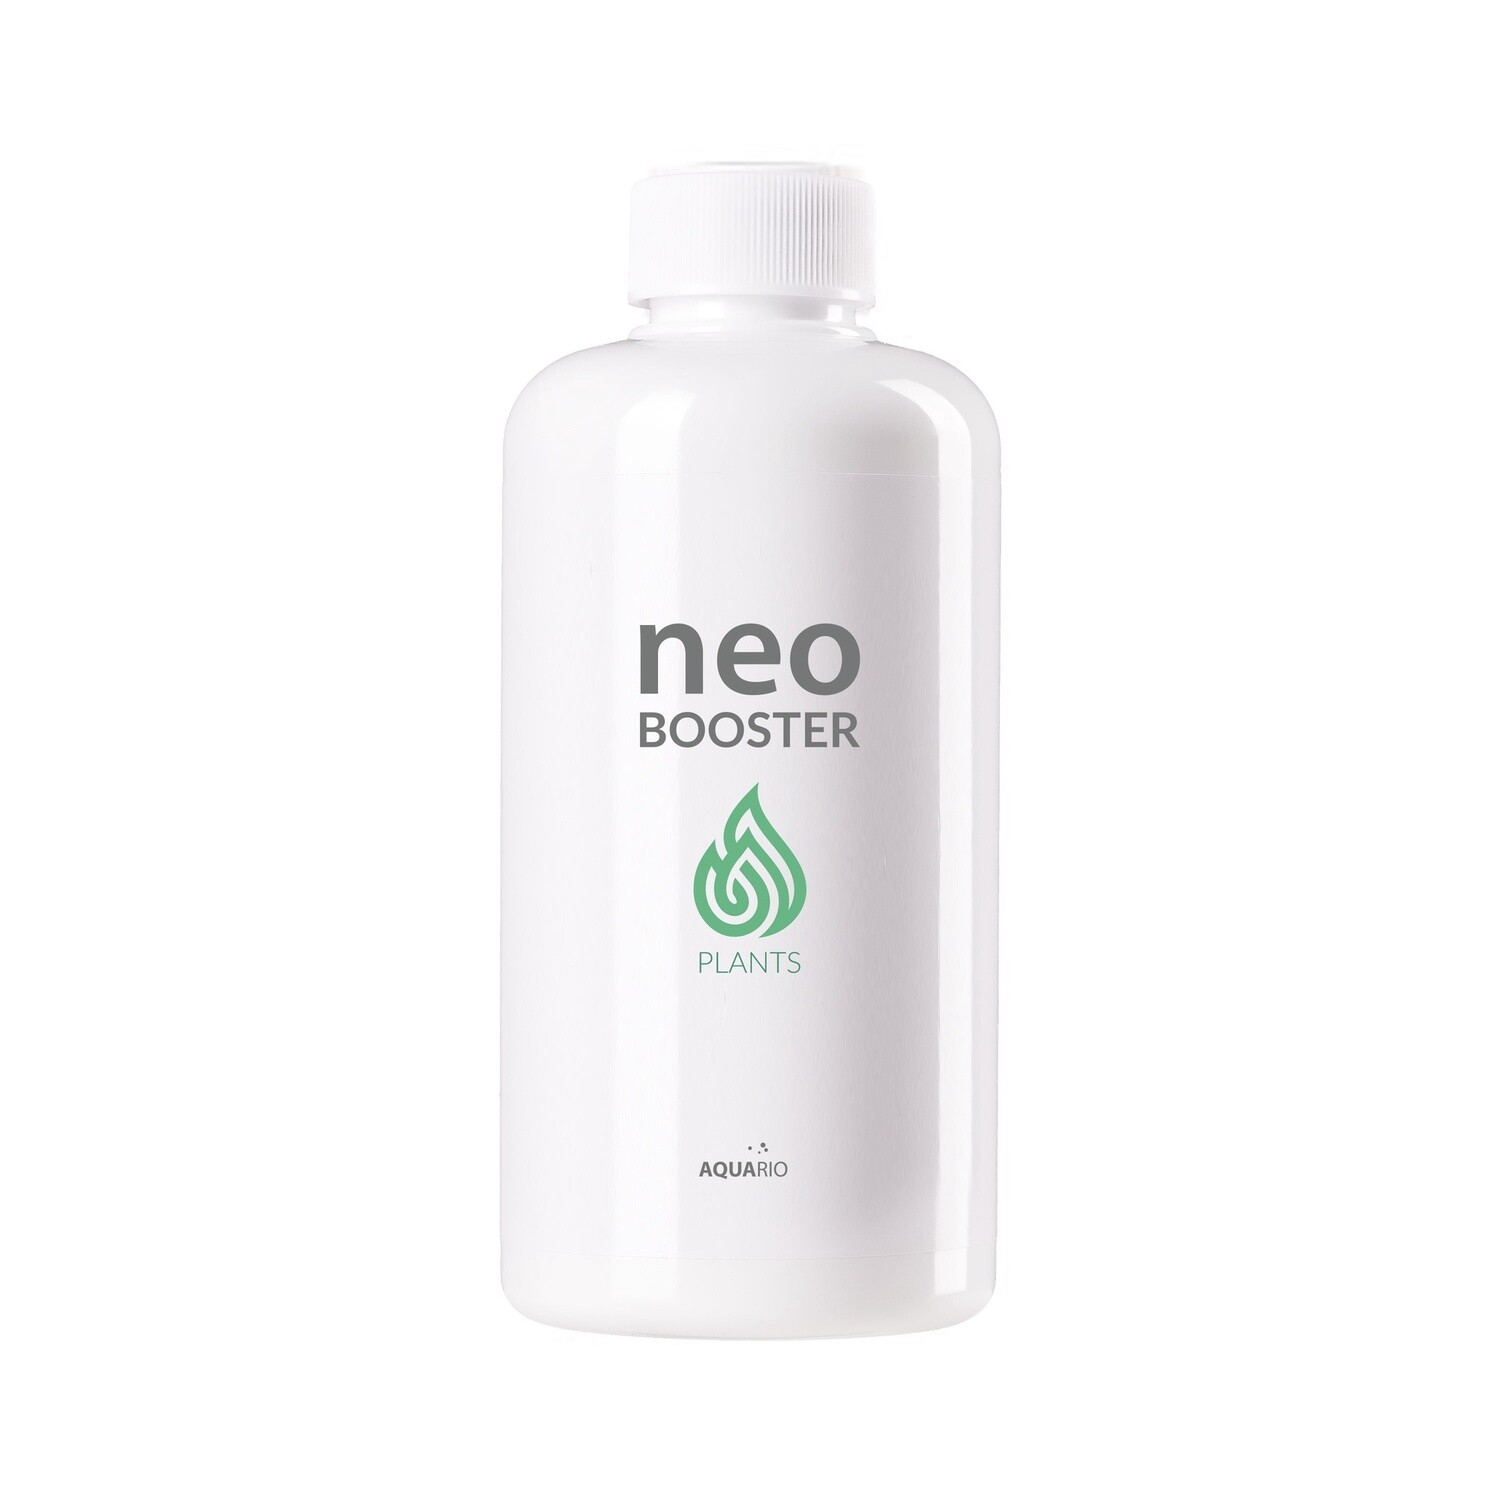 Neo Booster Plants, volume: Neo Booster Plants 300ml